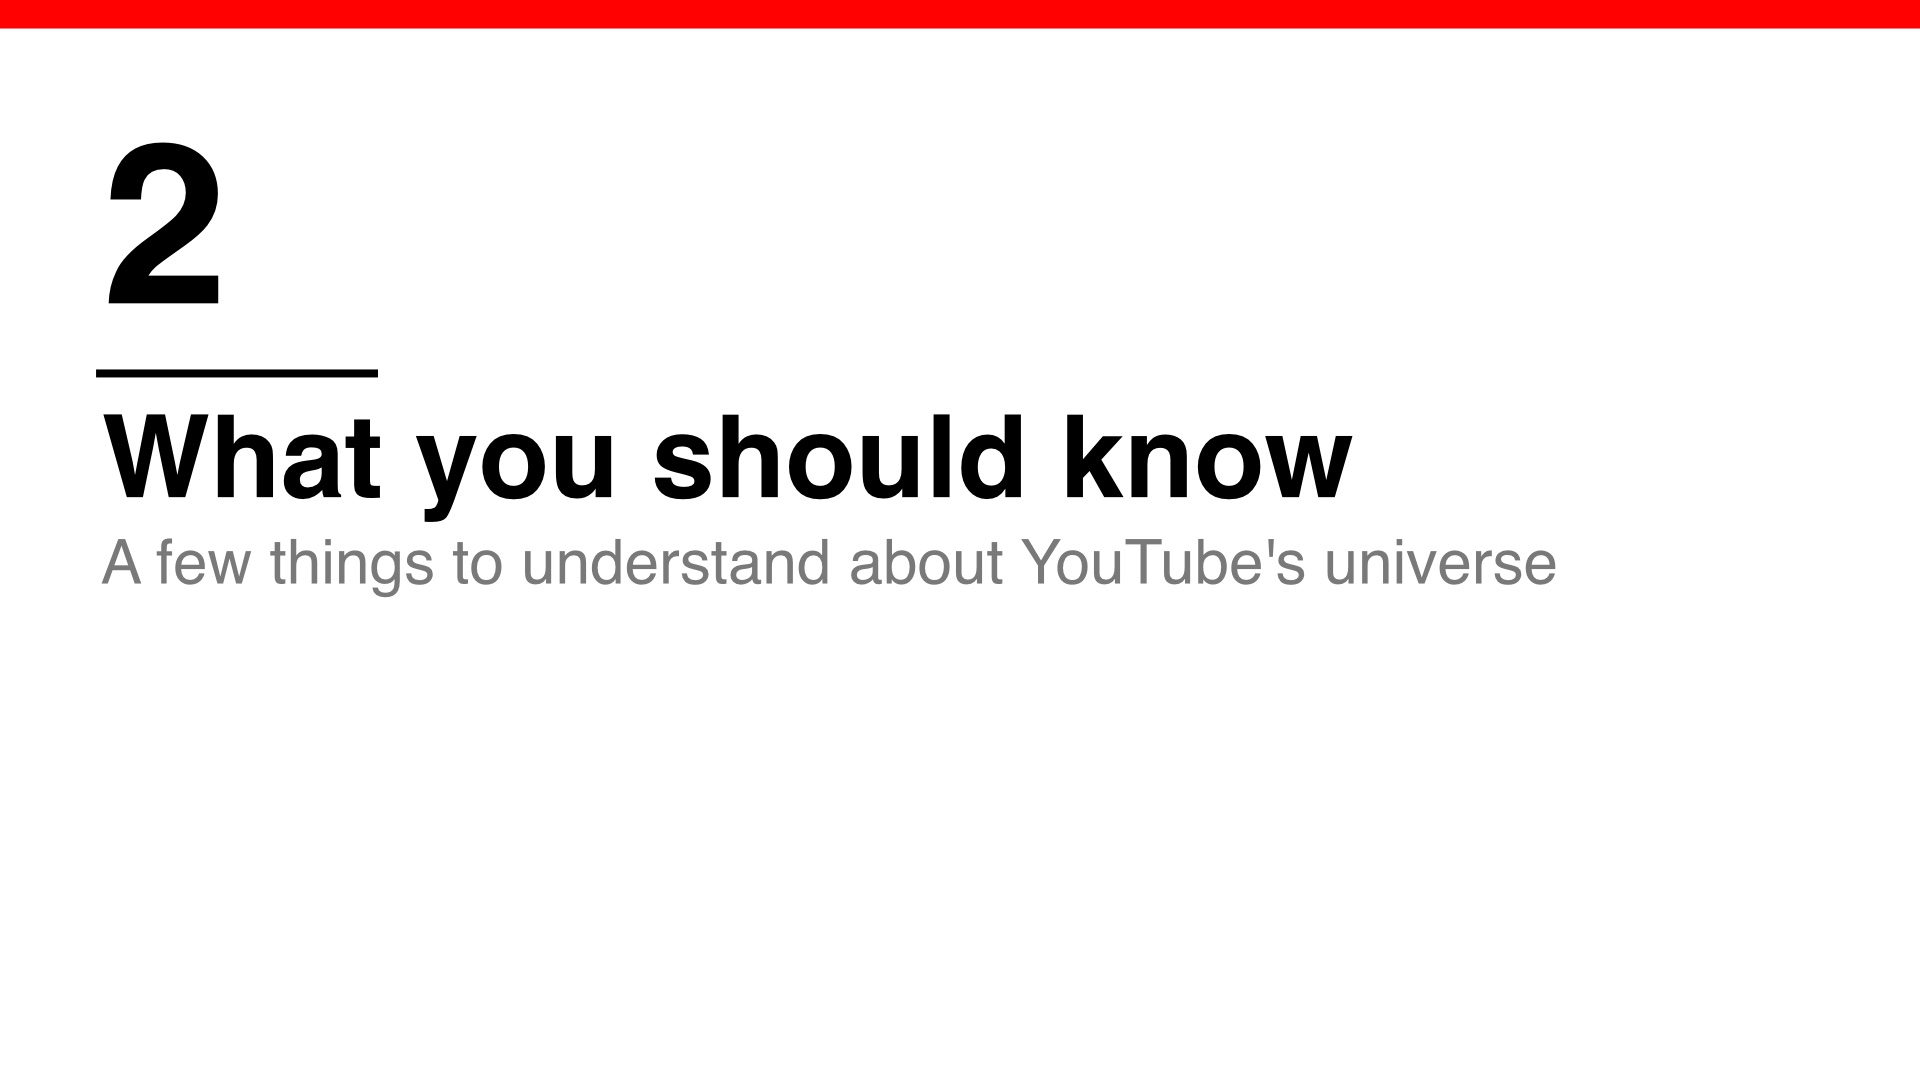 Section 2: What you should know
A few things to understand about YouTube's universe